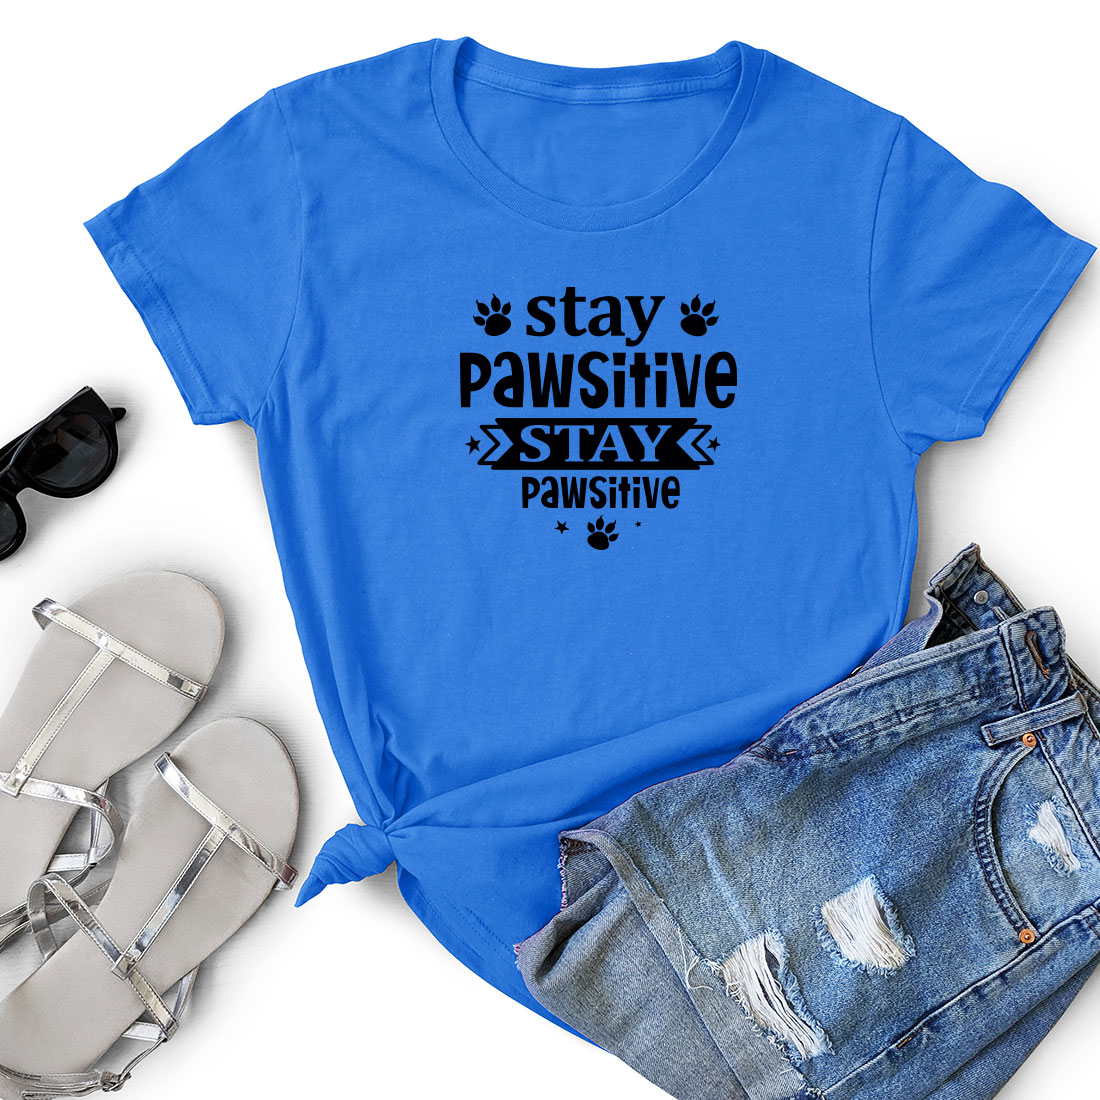 T - shirt that says stay pawshive on it.